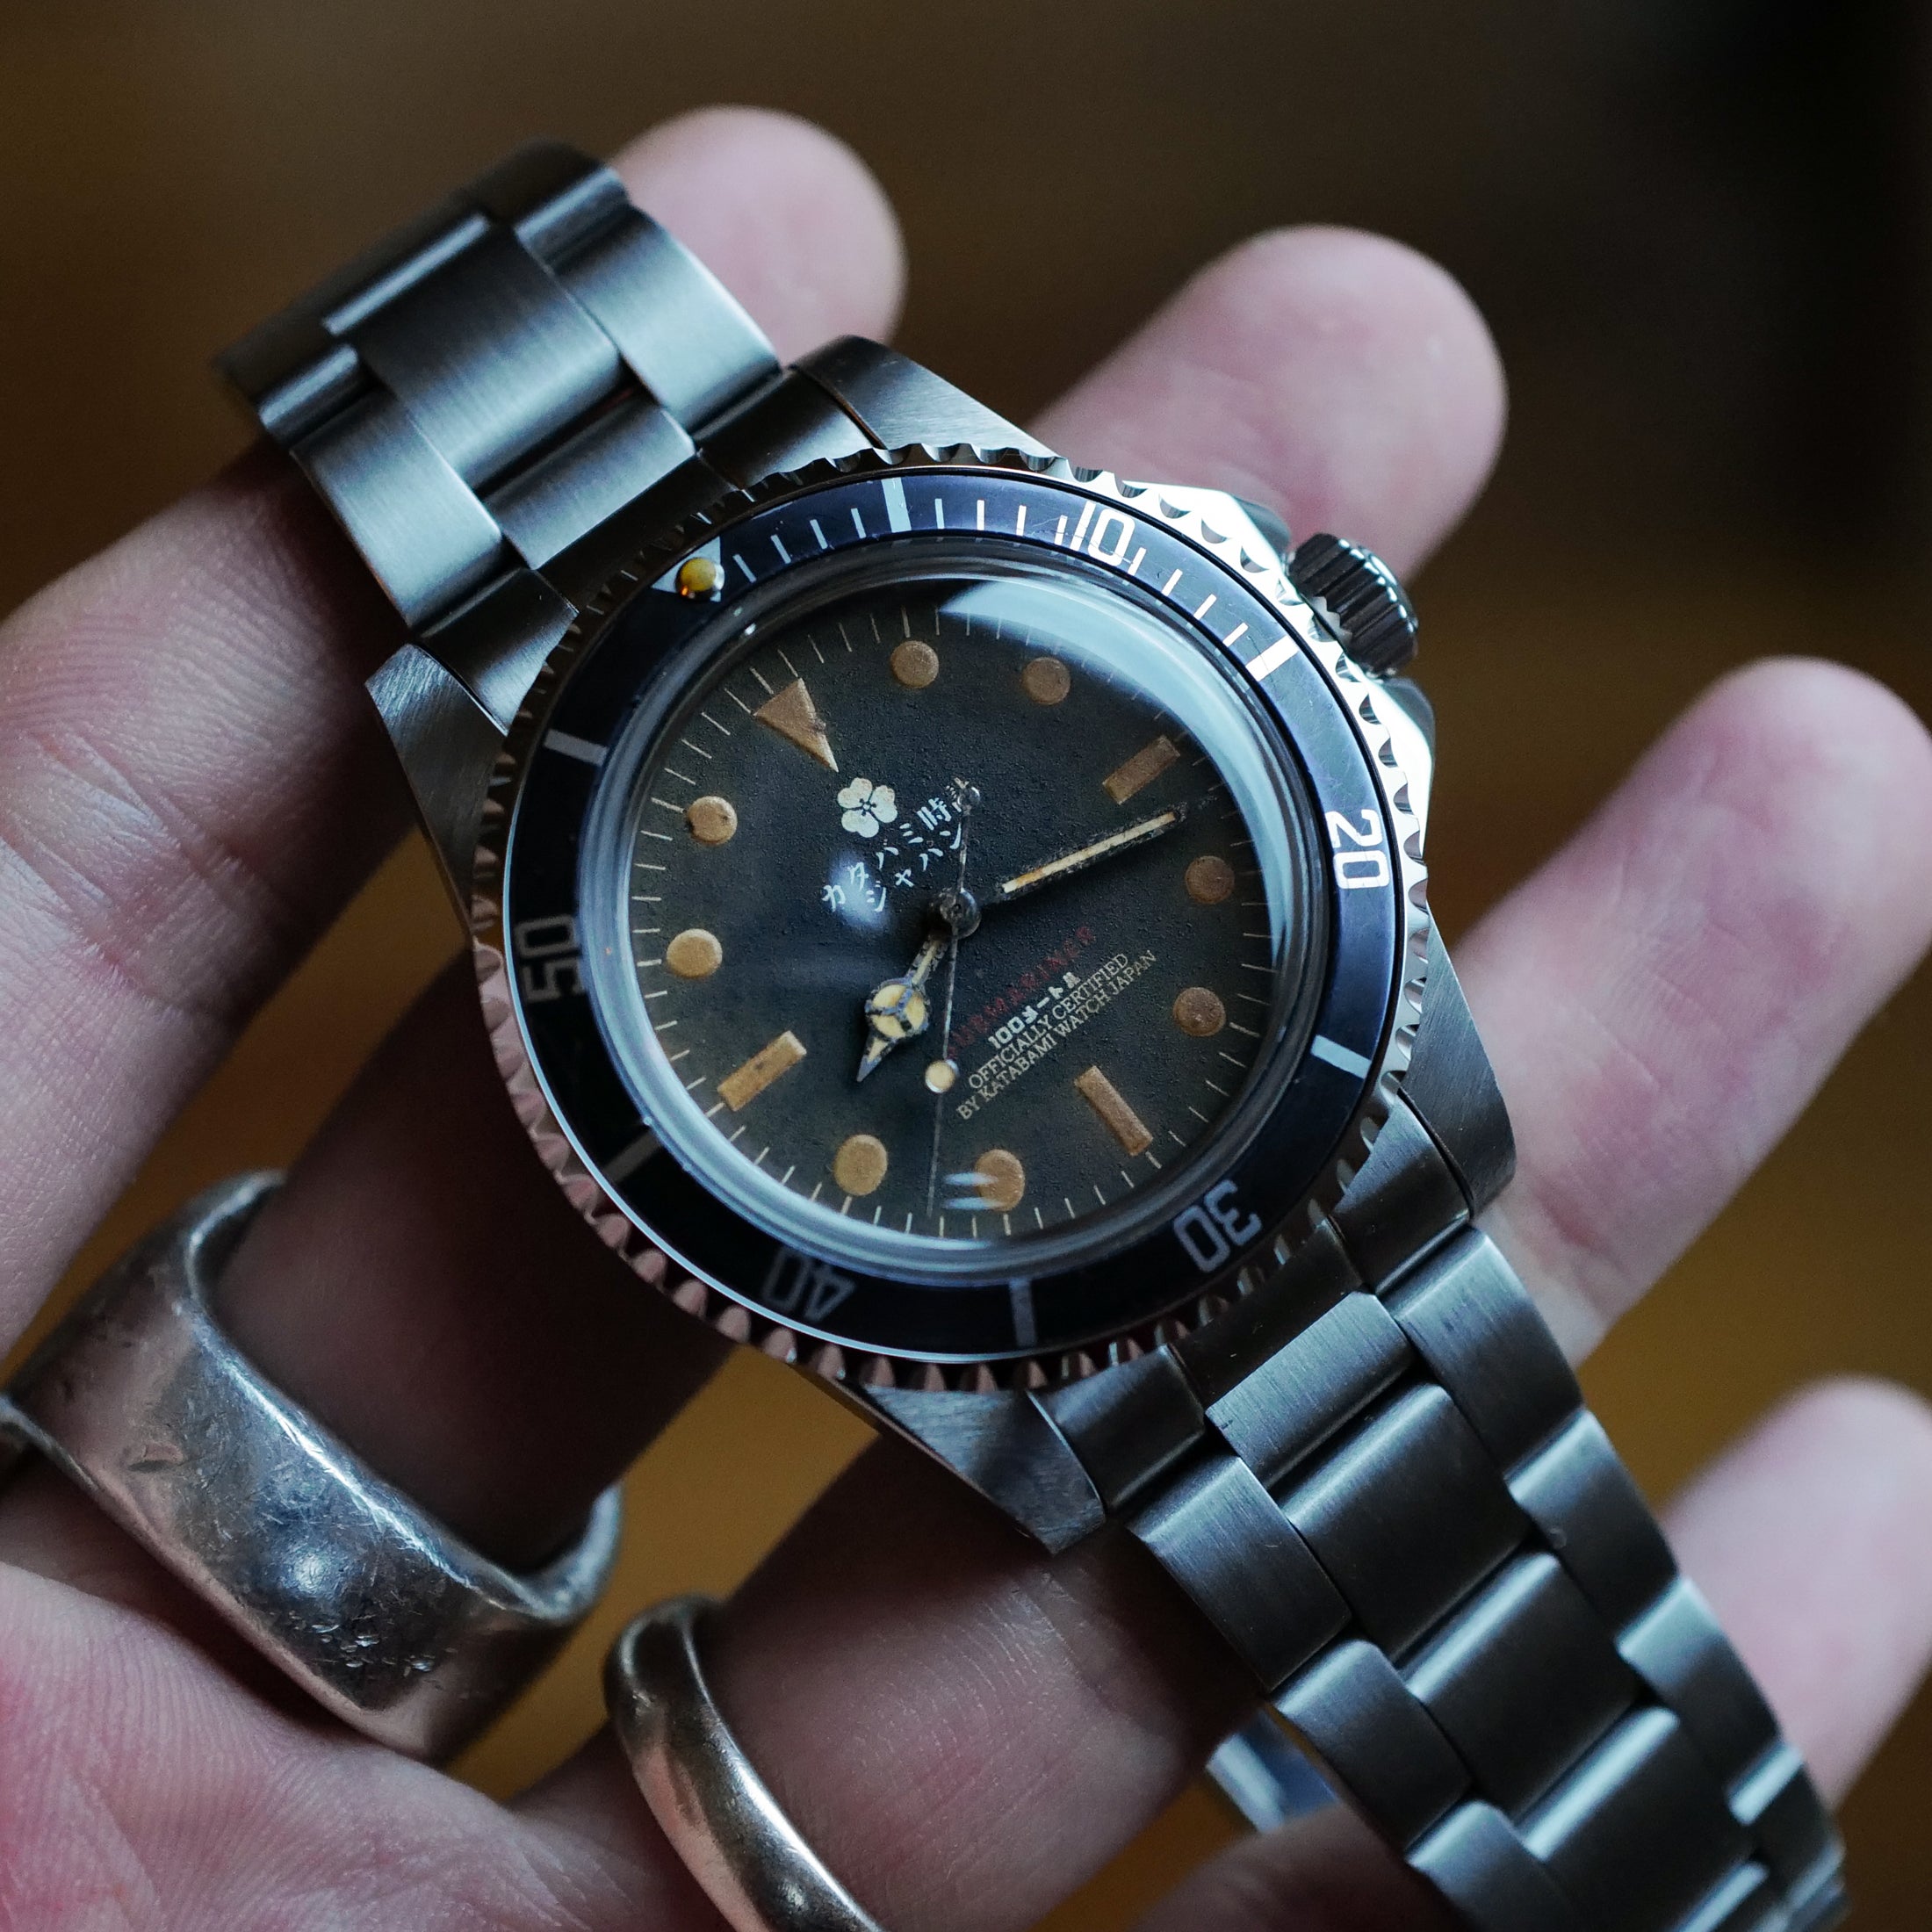 The diver "231"